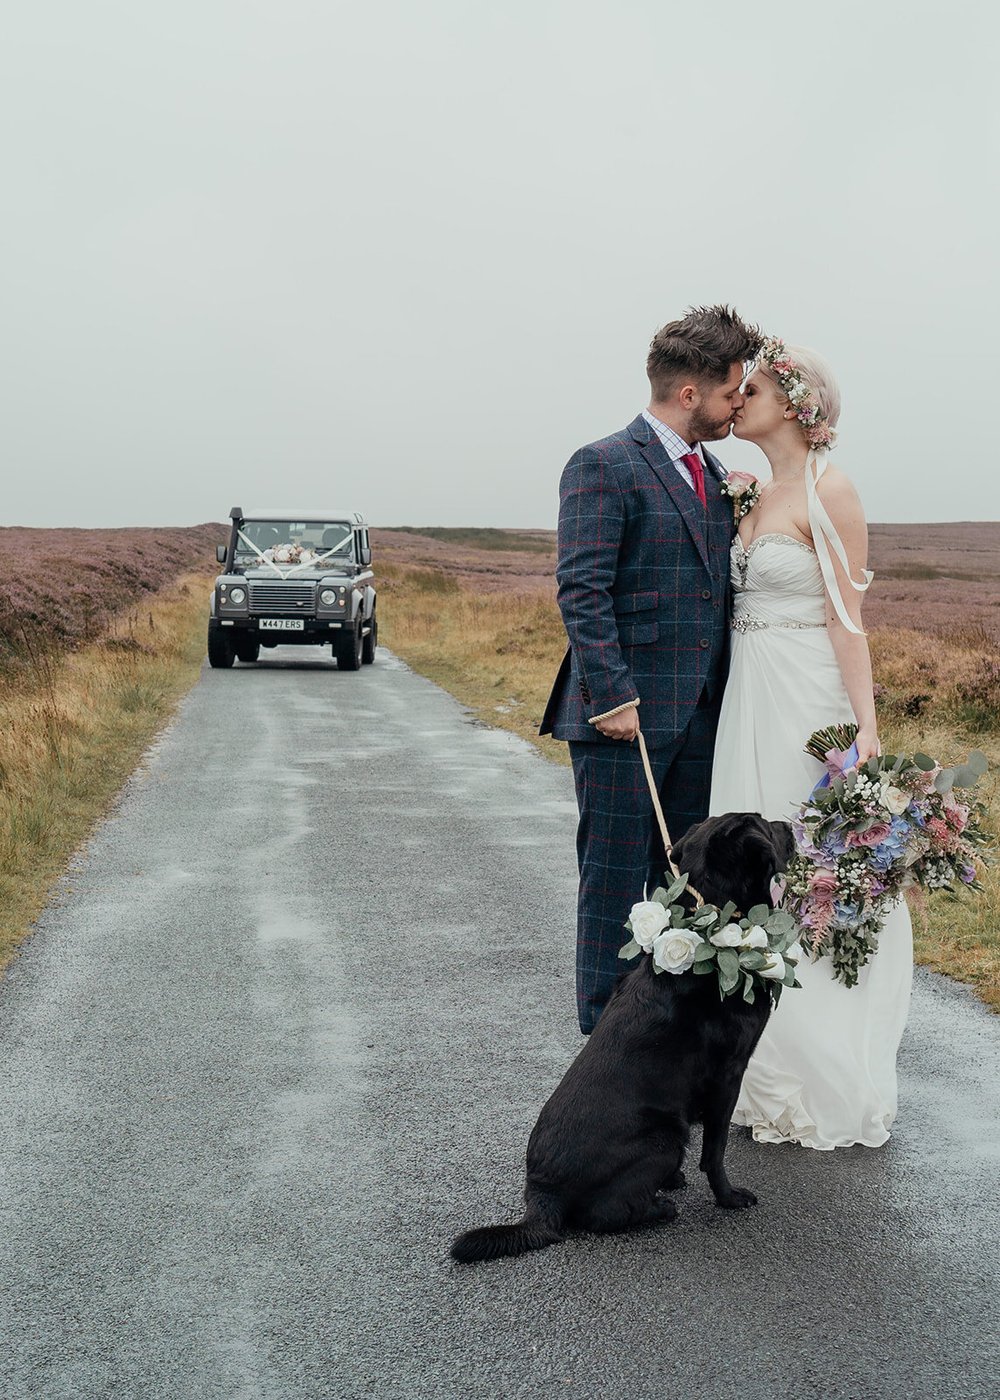 how to involve your dog on your wedding day